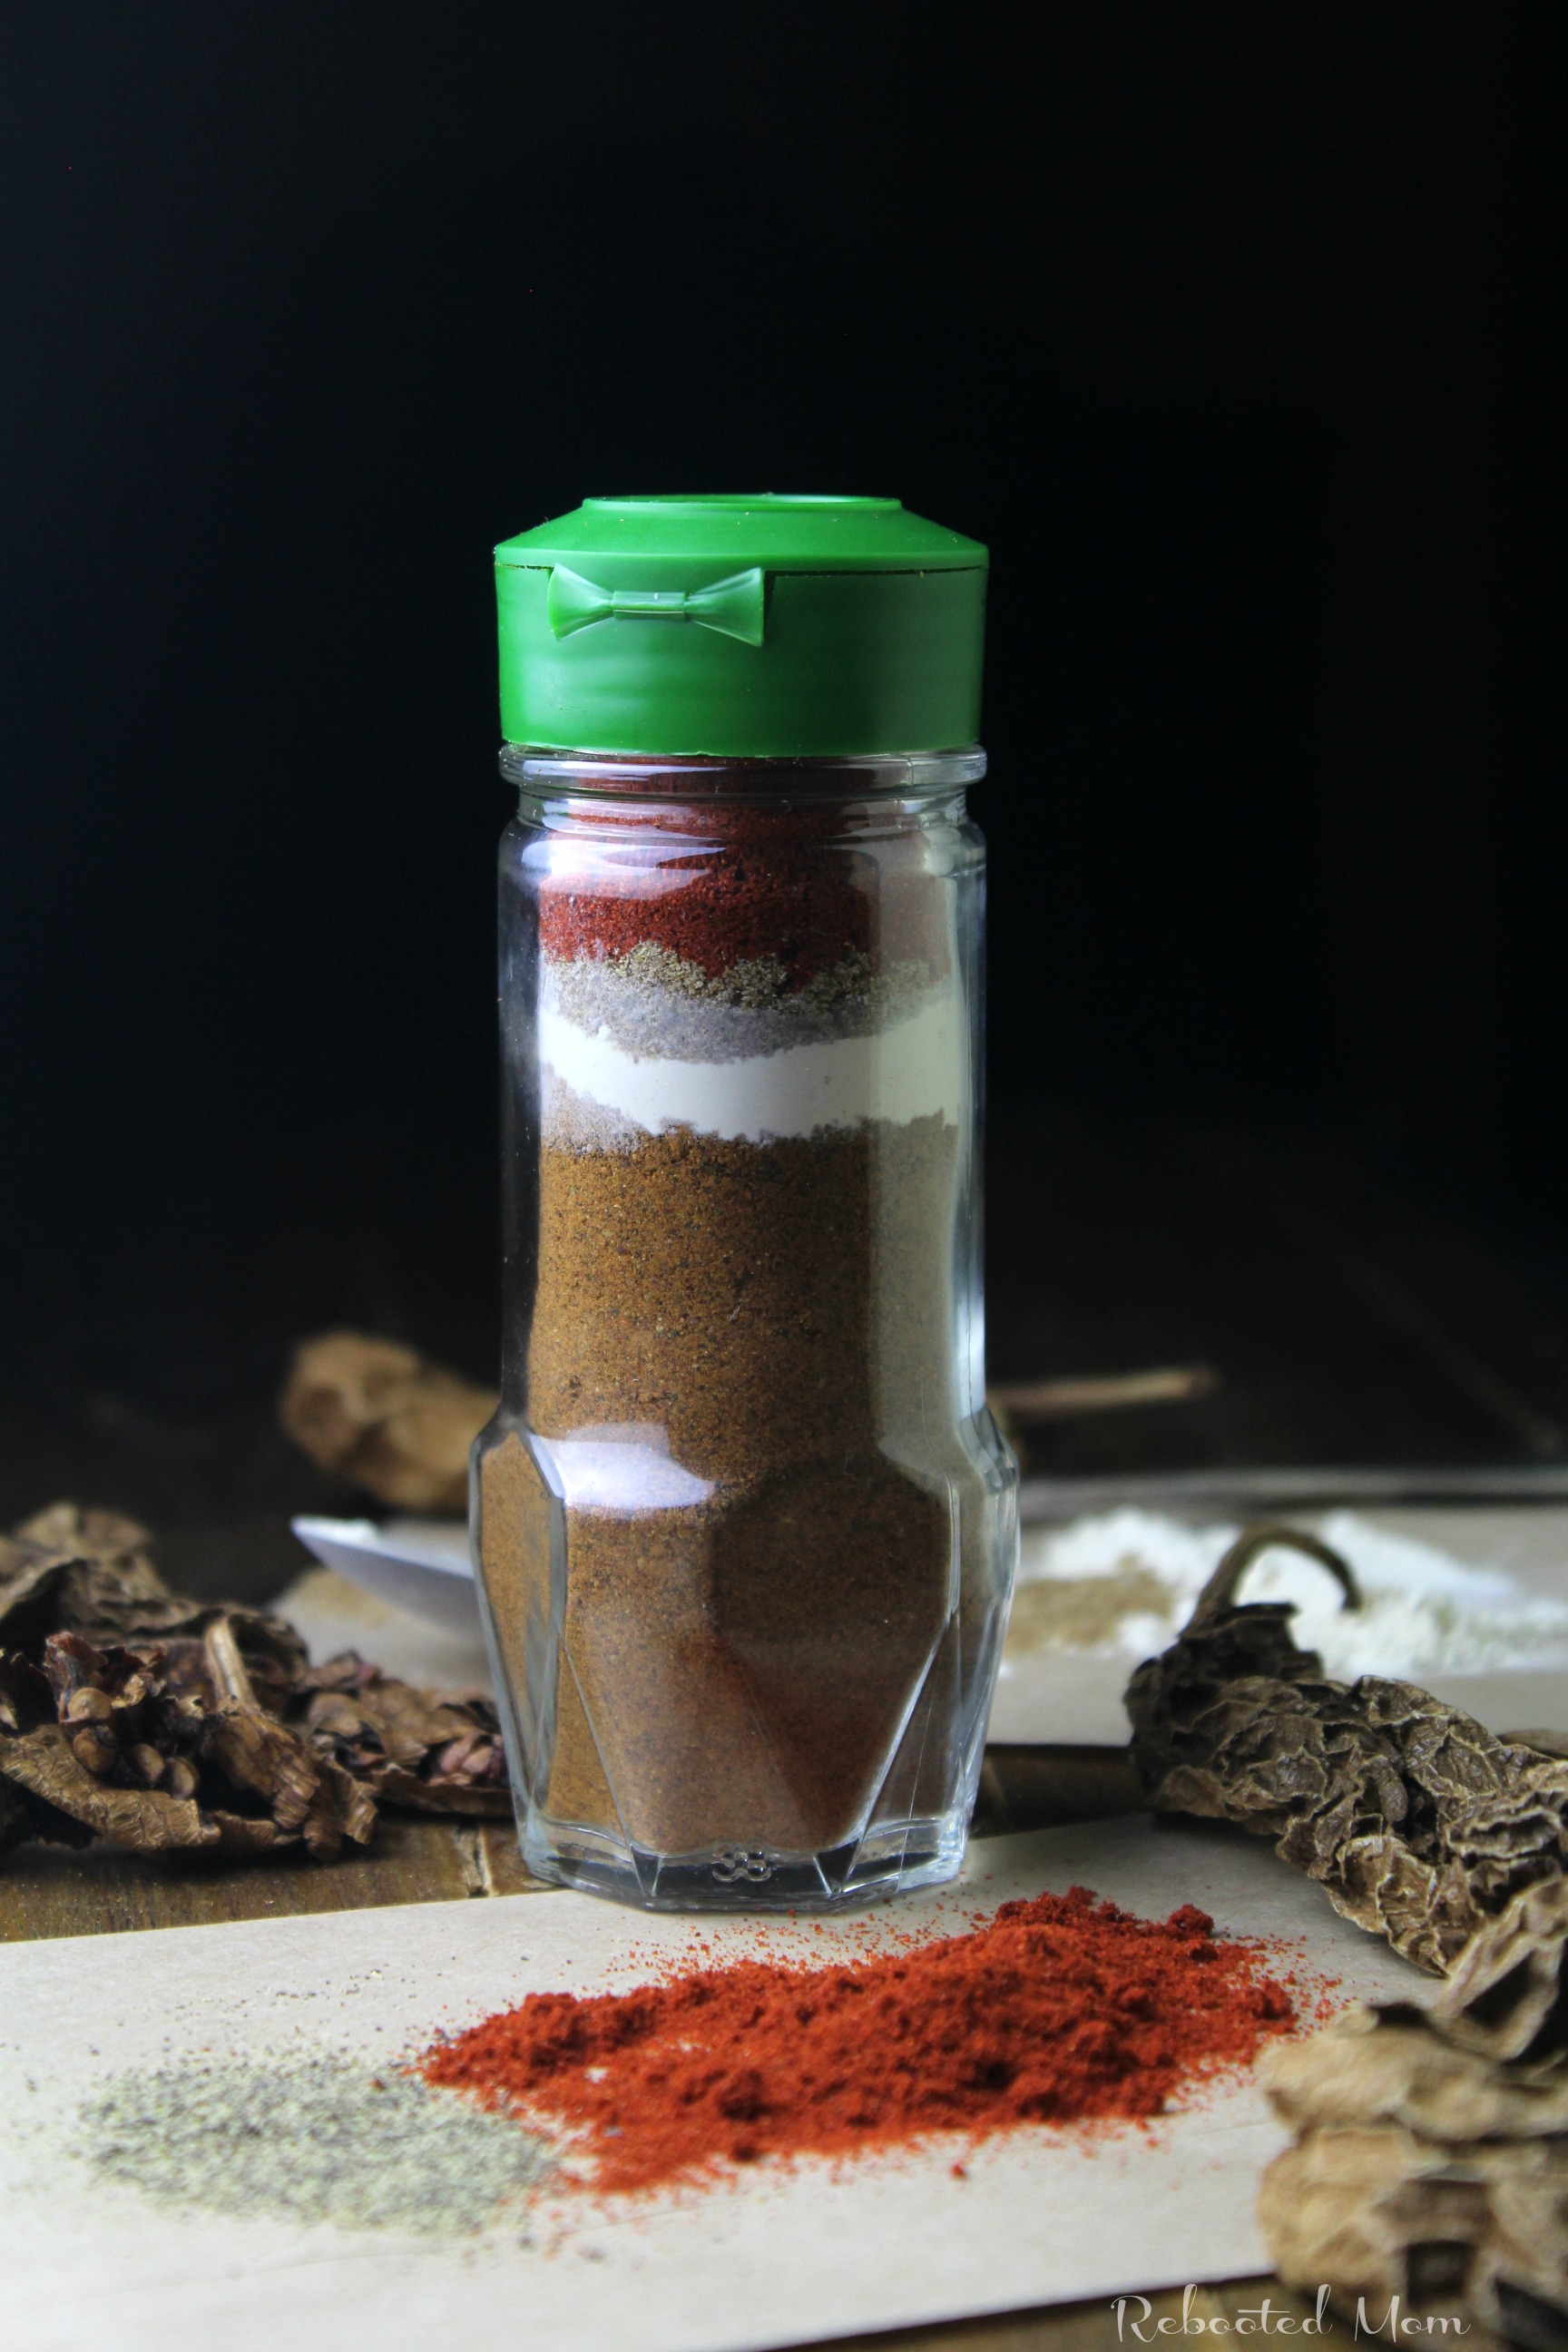 Use this easy and inexpensive homemade chipotle seasoning recipe to add flavor and a smoky heat to all of your favorite foods.